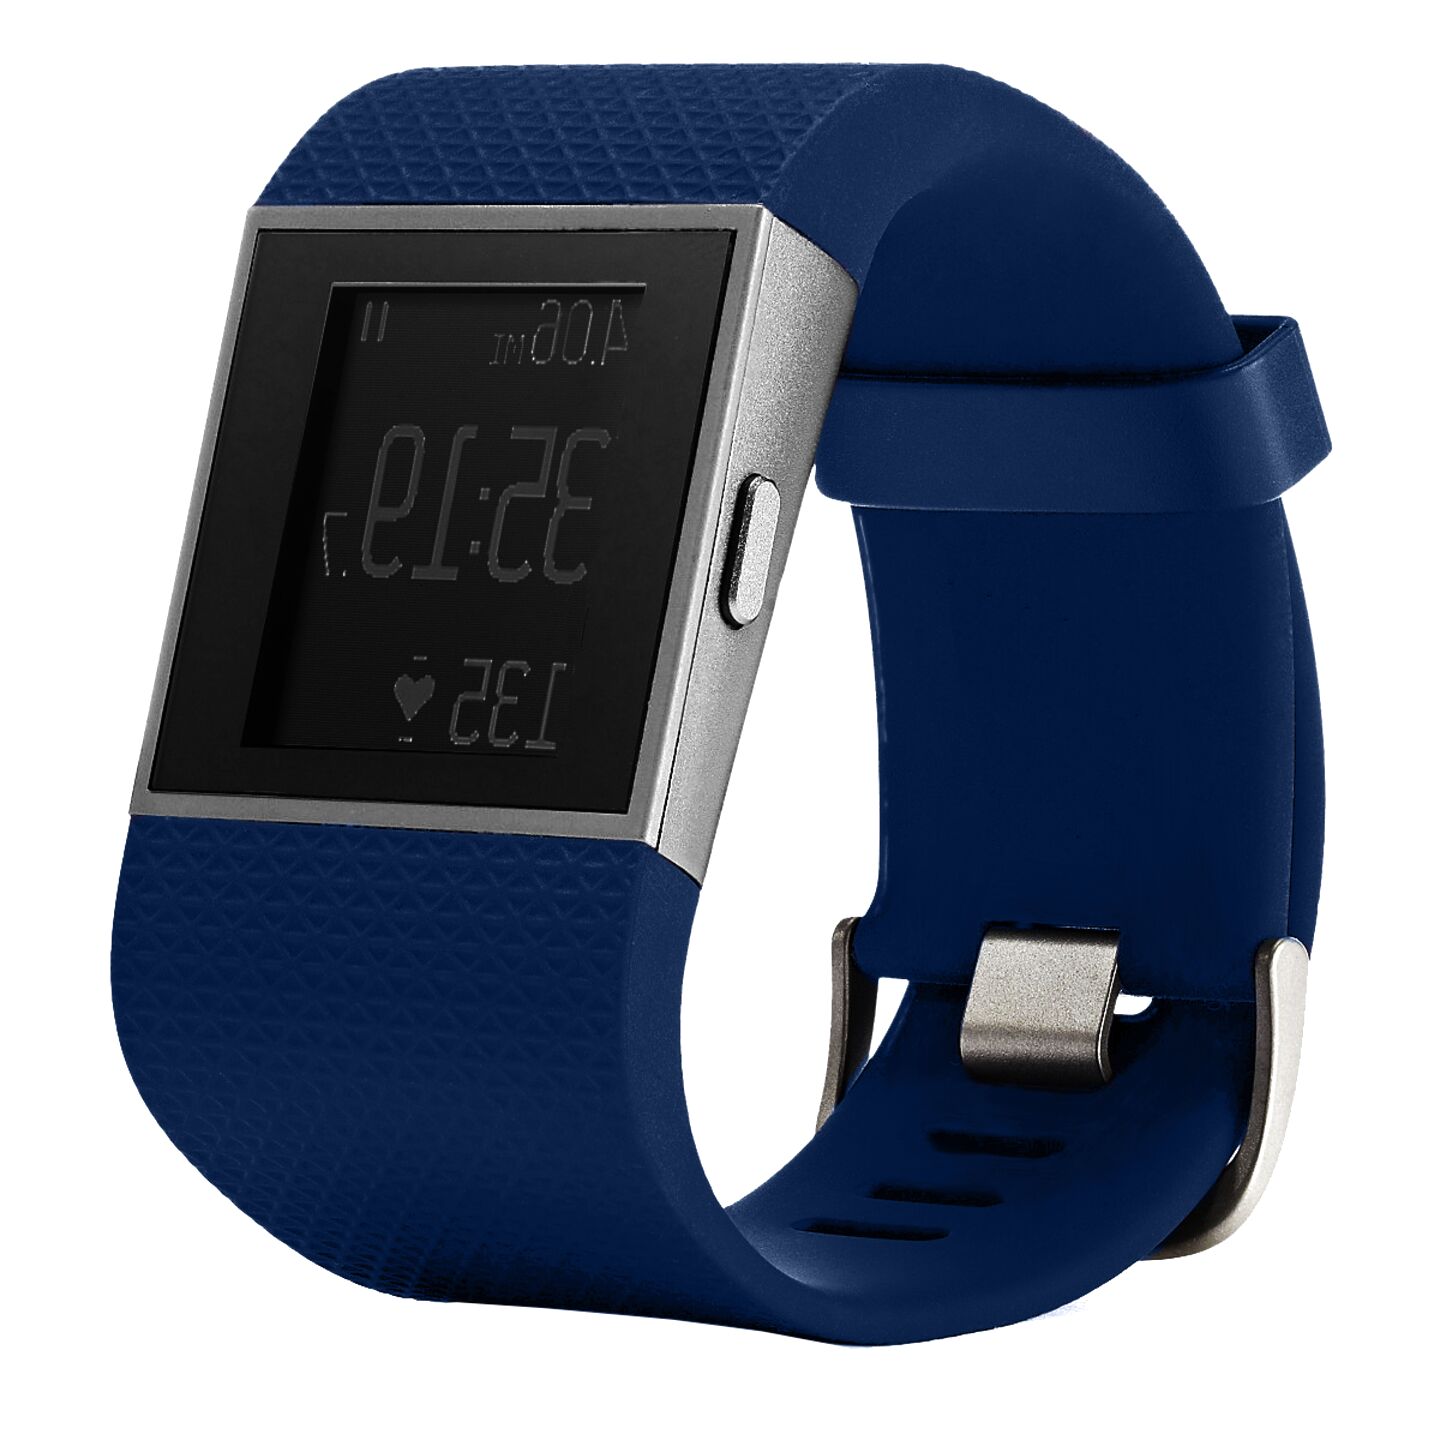 Fitbit Surge Watch for sale in UK | View 44 bargains